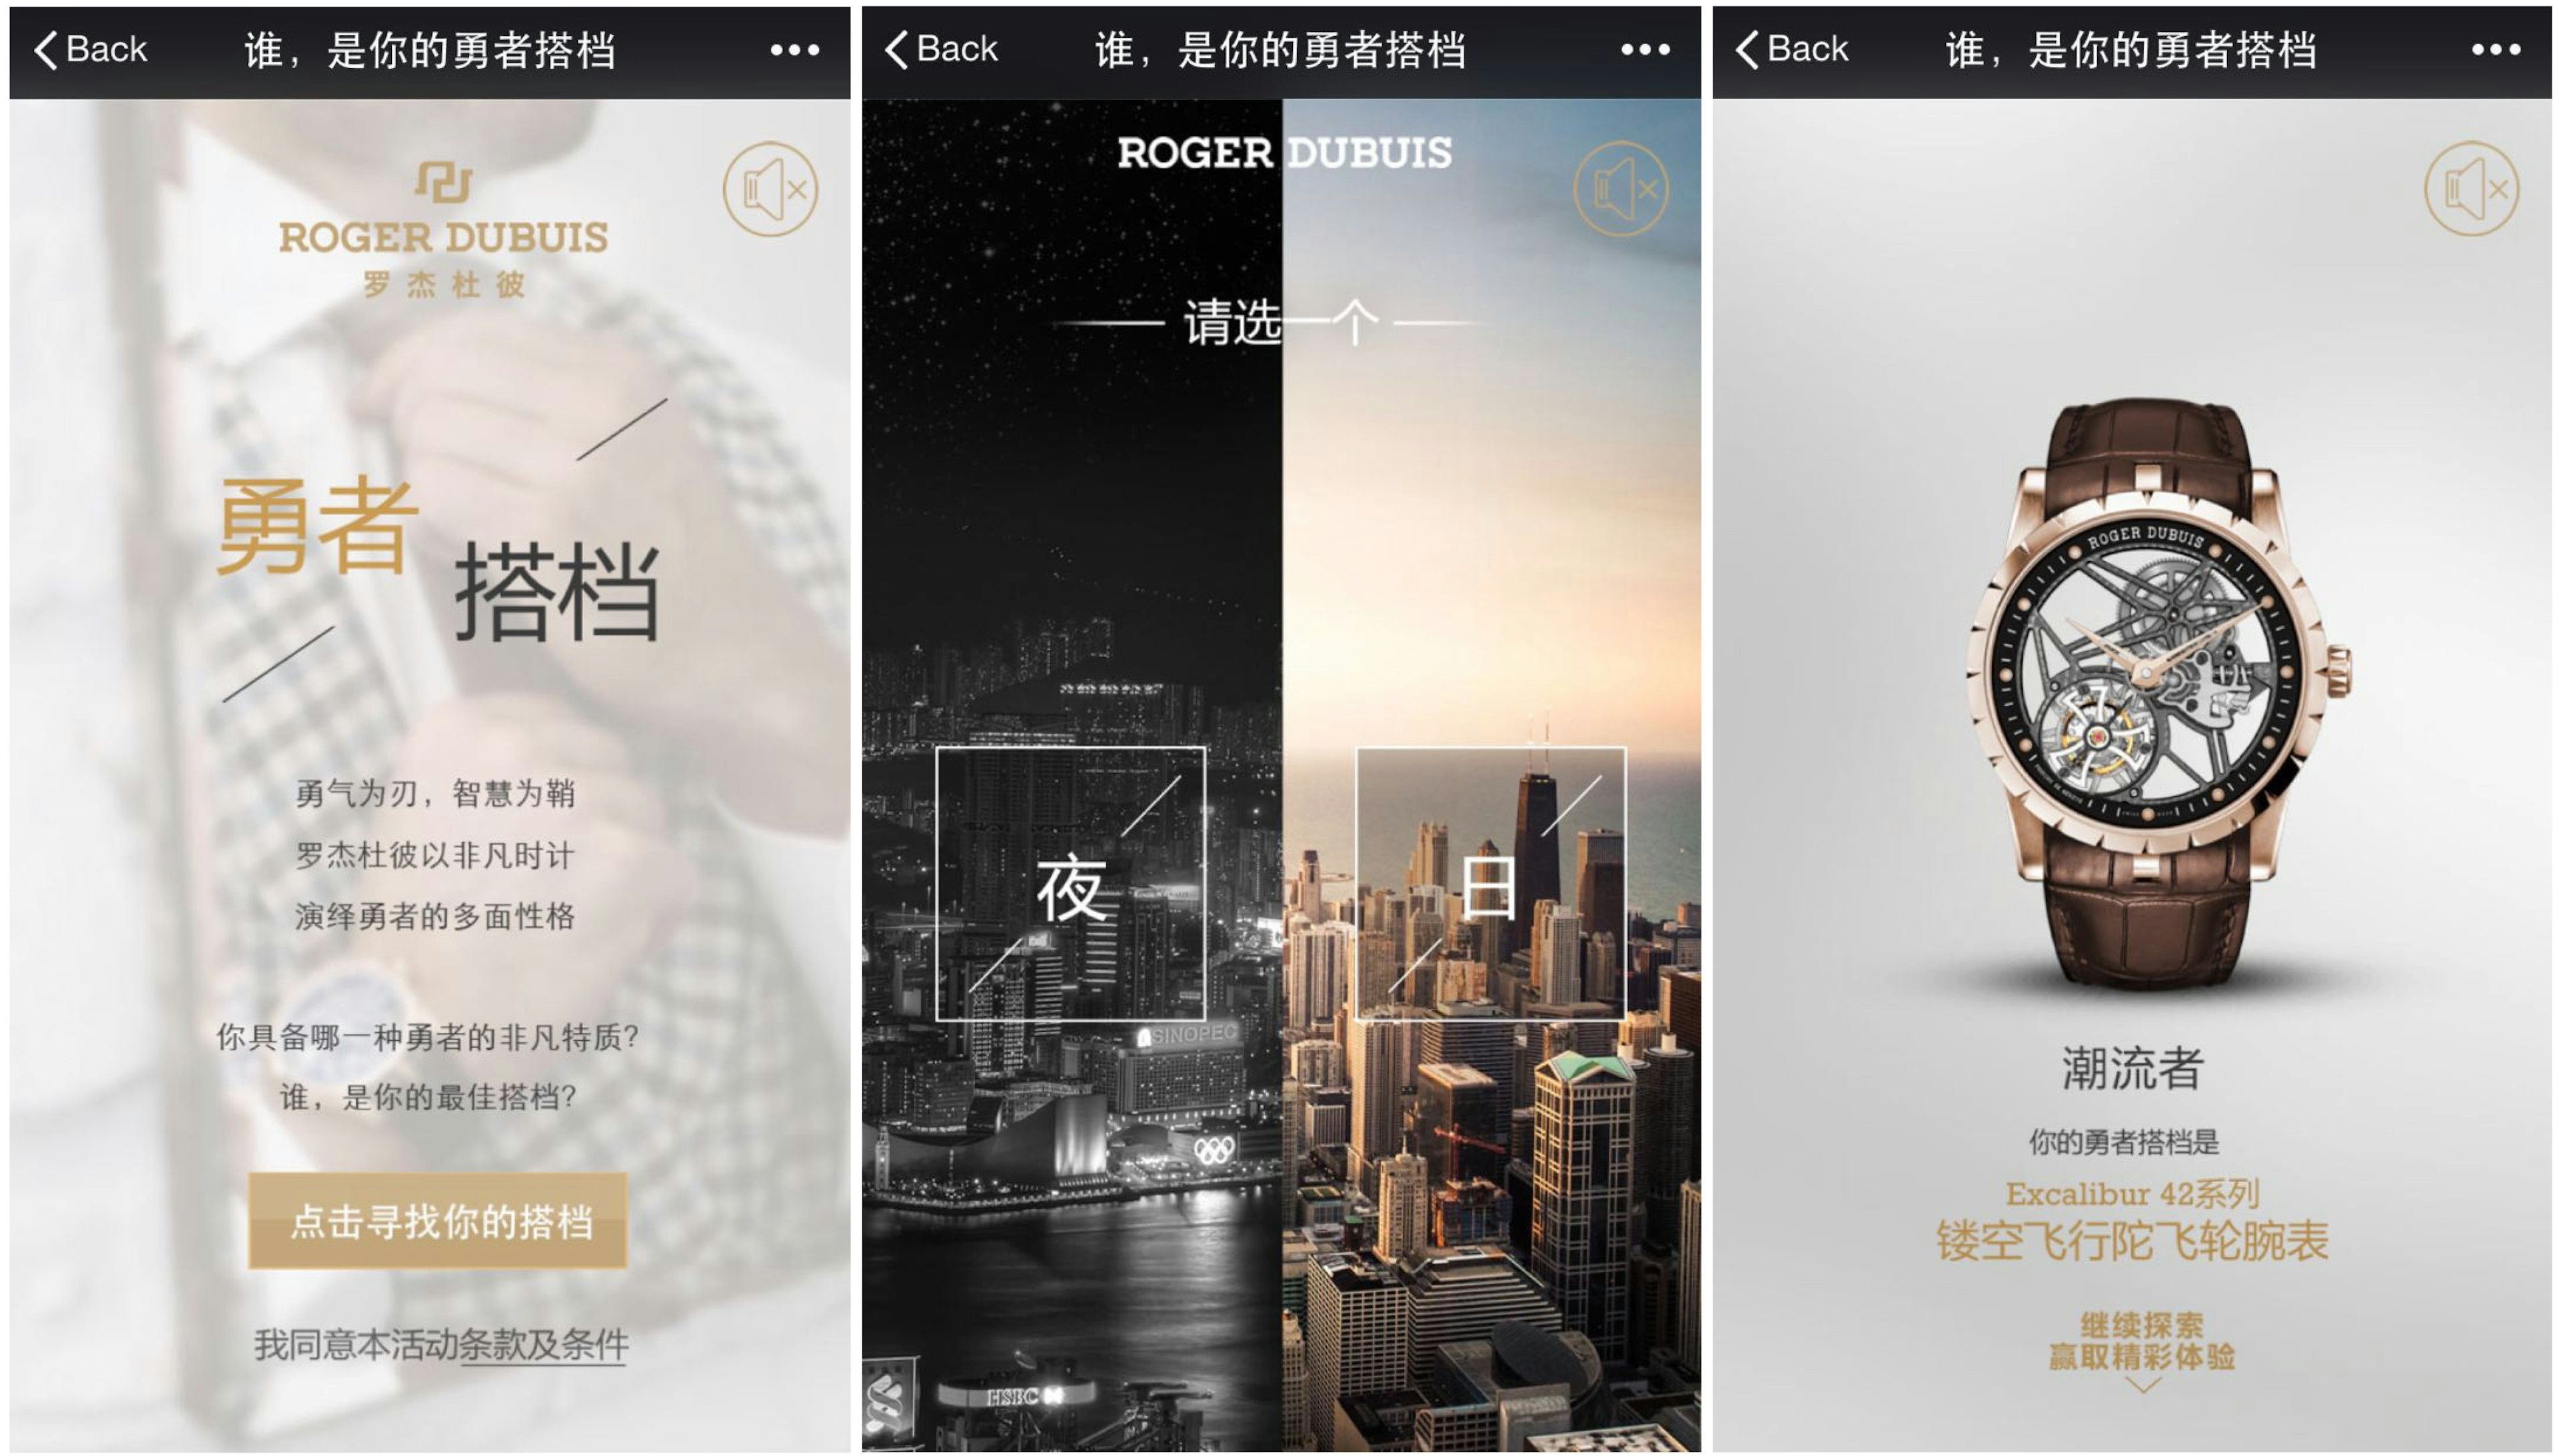 Screenshots from the new Roger Dubuis WeChat campaign. 